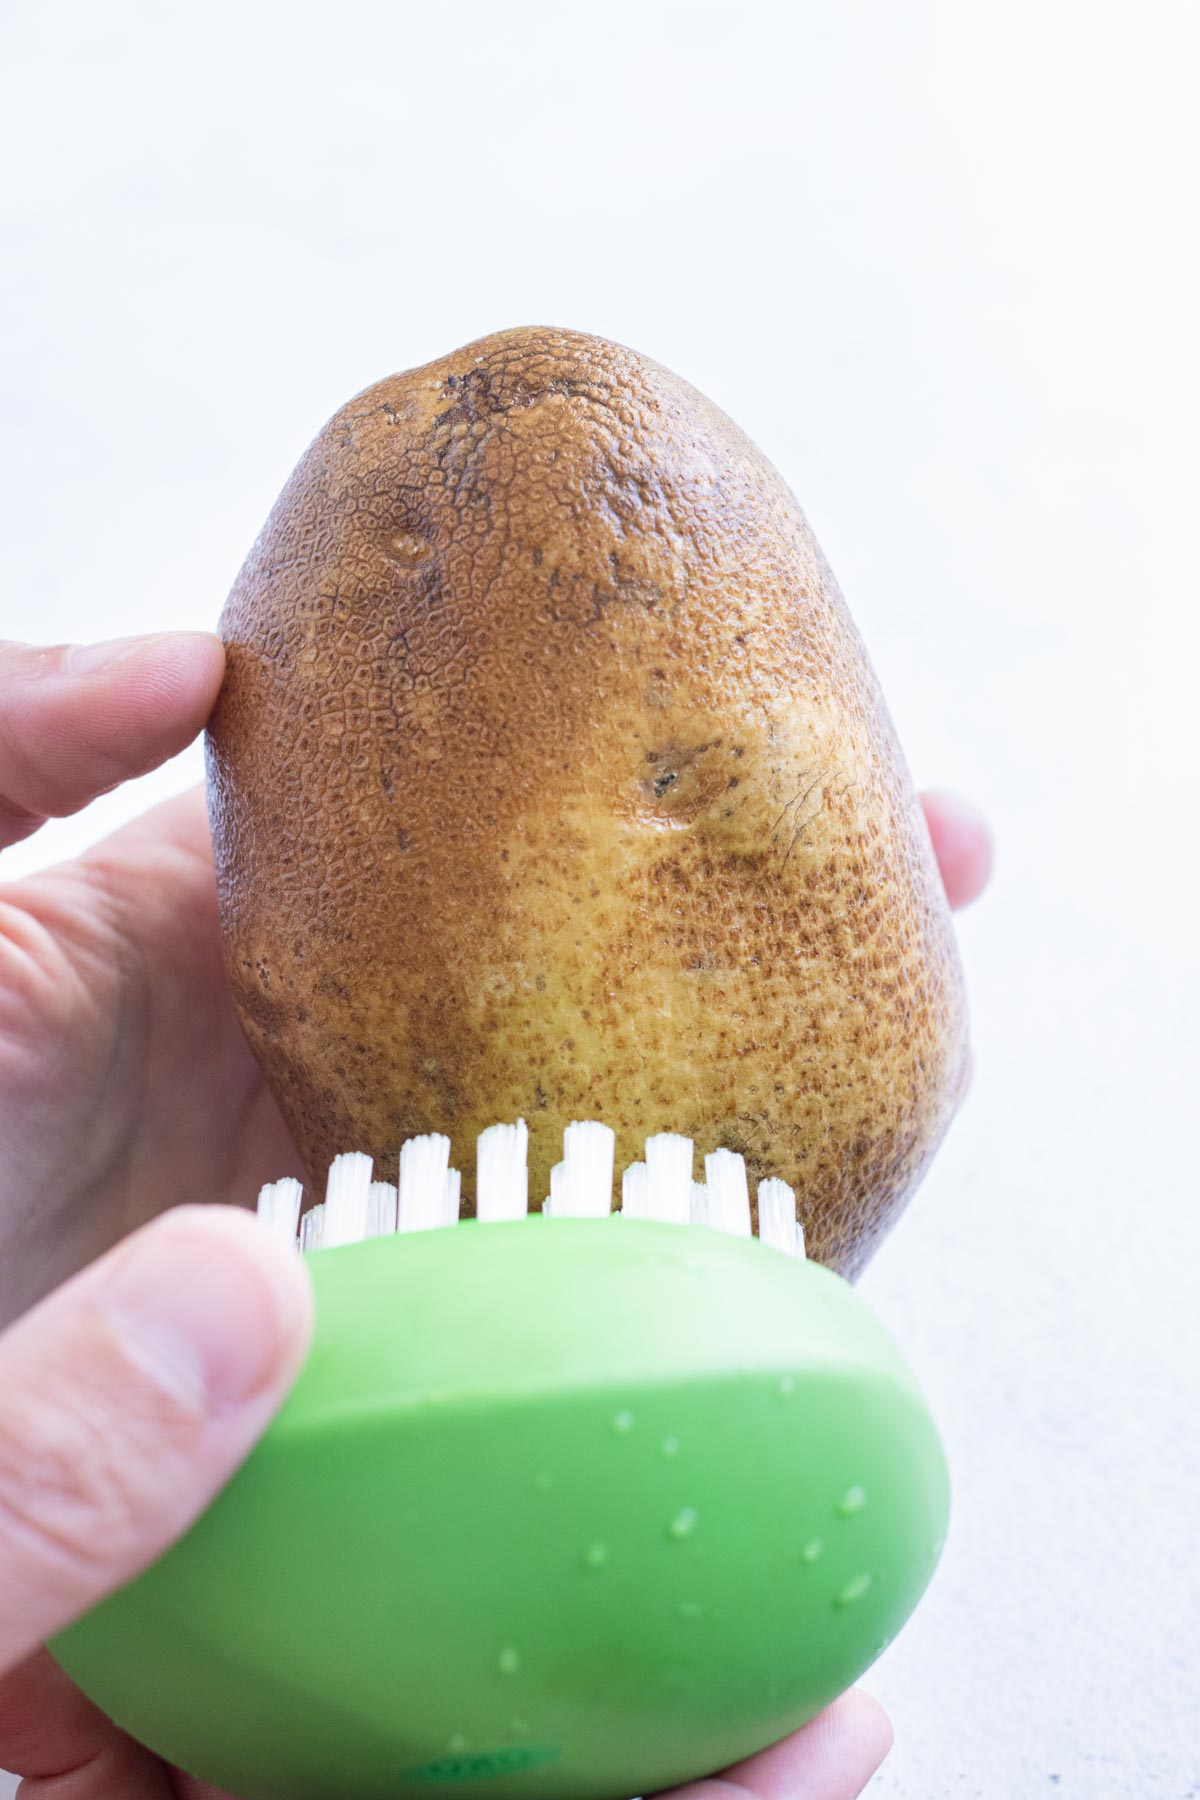 Clean the outside of the potato with a brush.